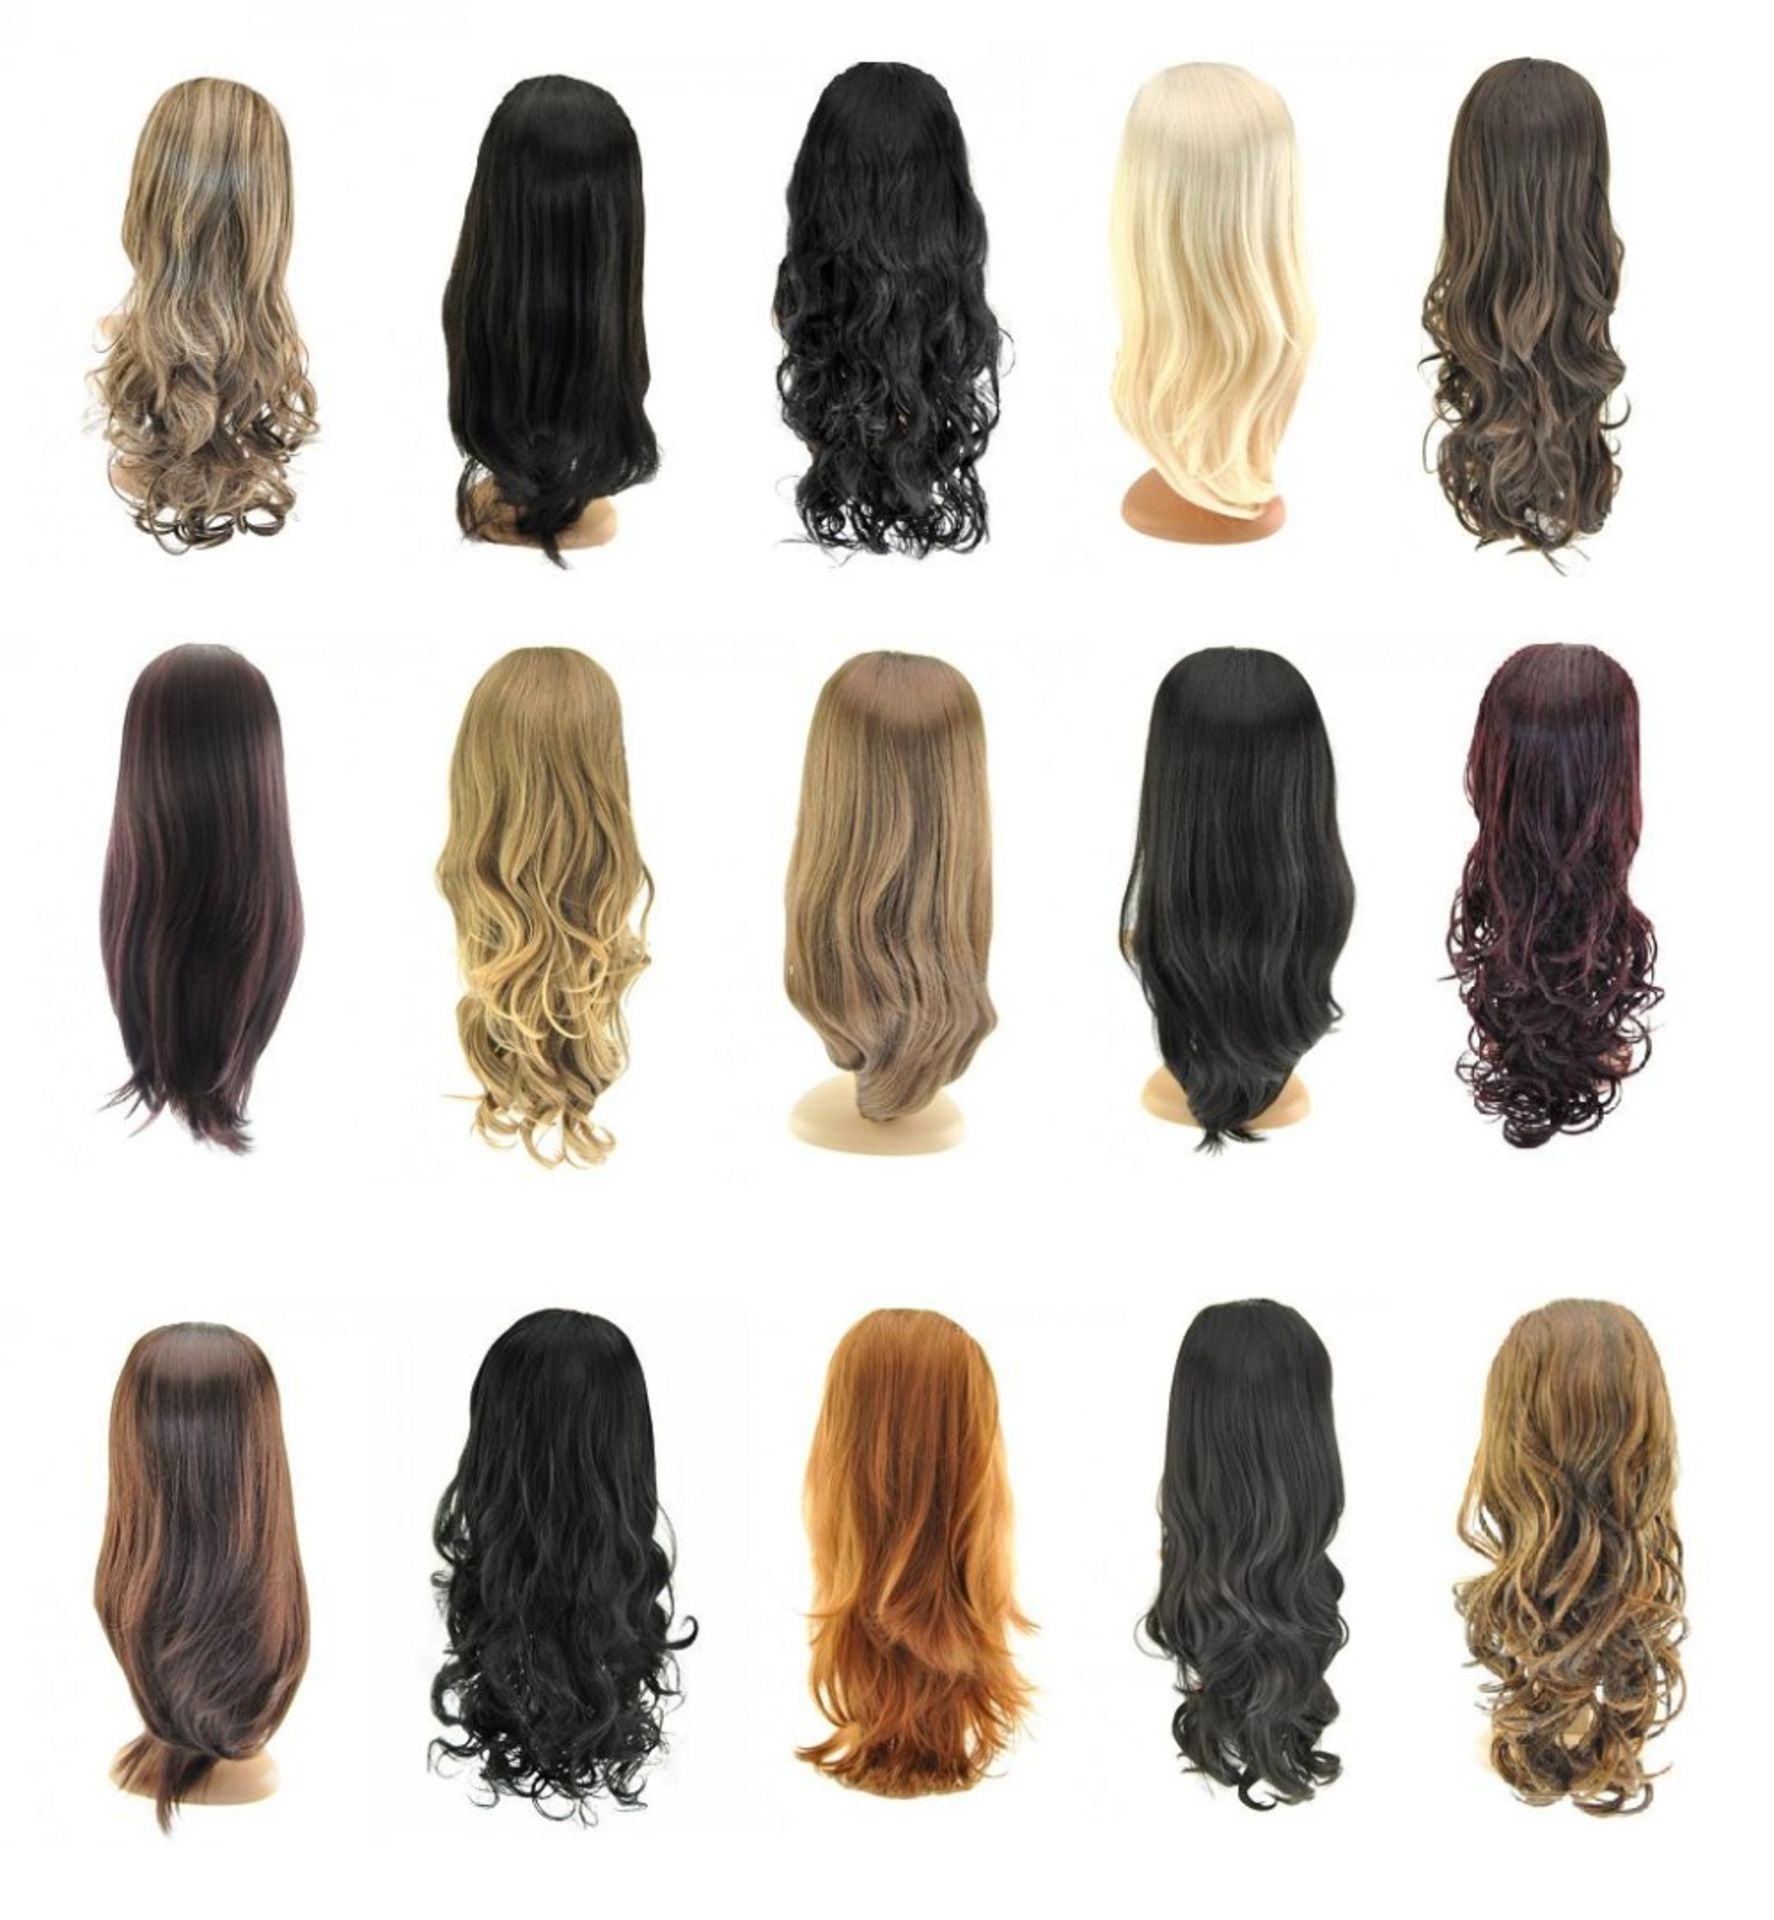 40 x Half Wigs – Individually Boxed – 5 Types / Styles - NO VAT - UK Delivery £15